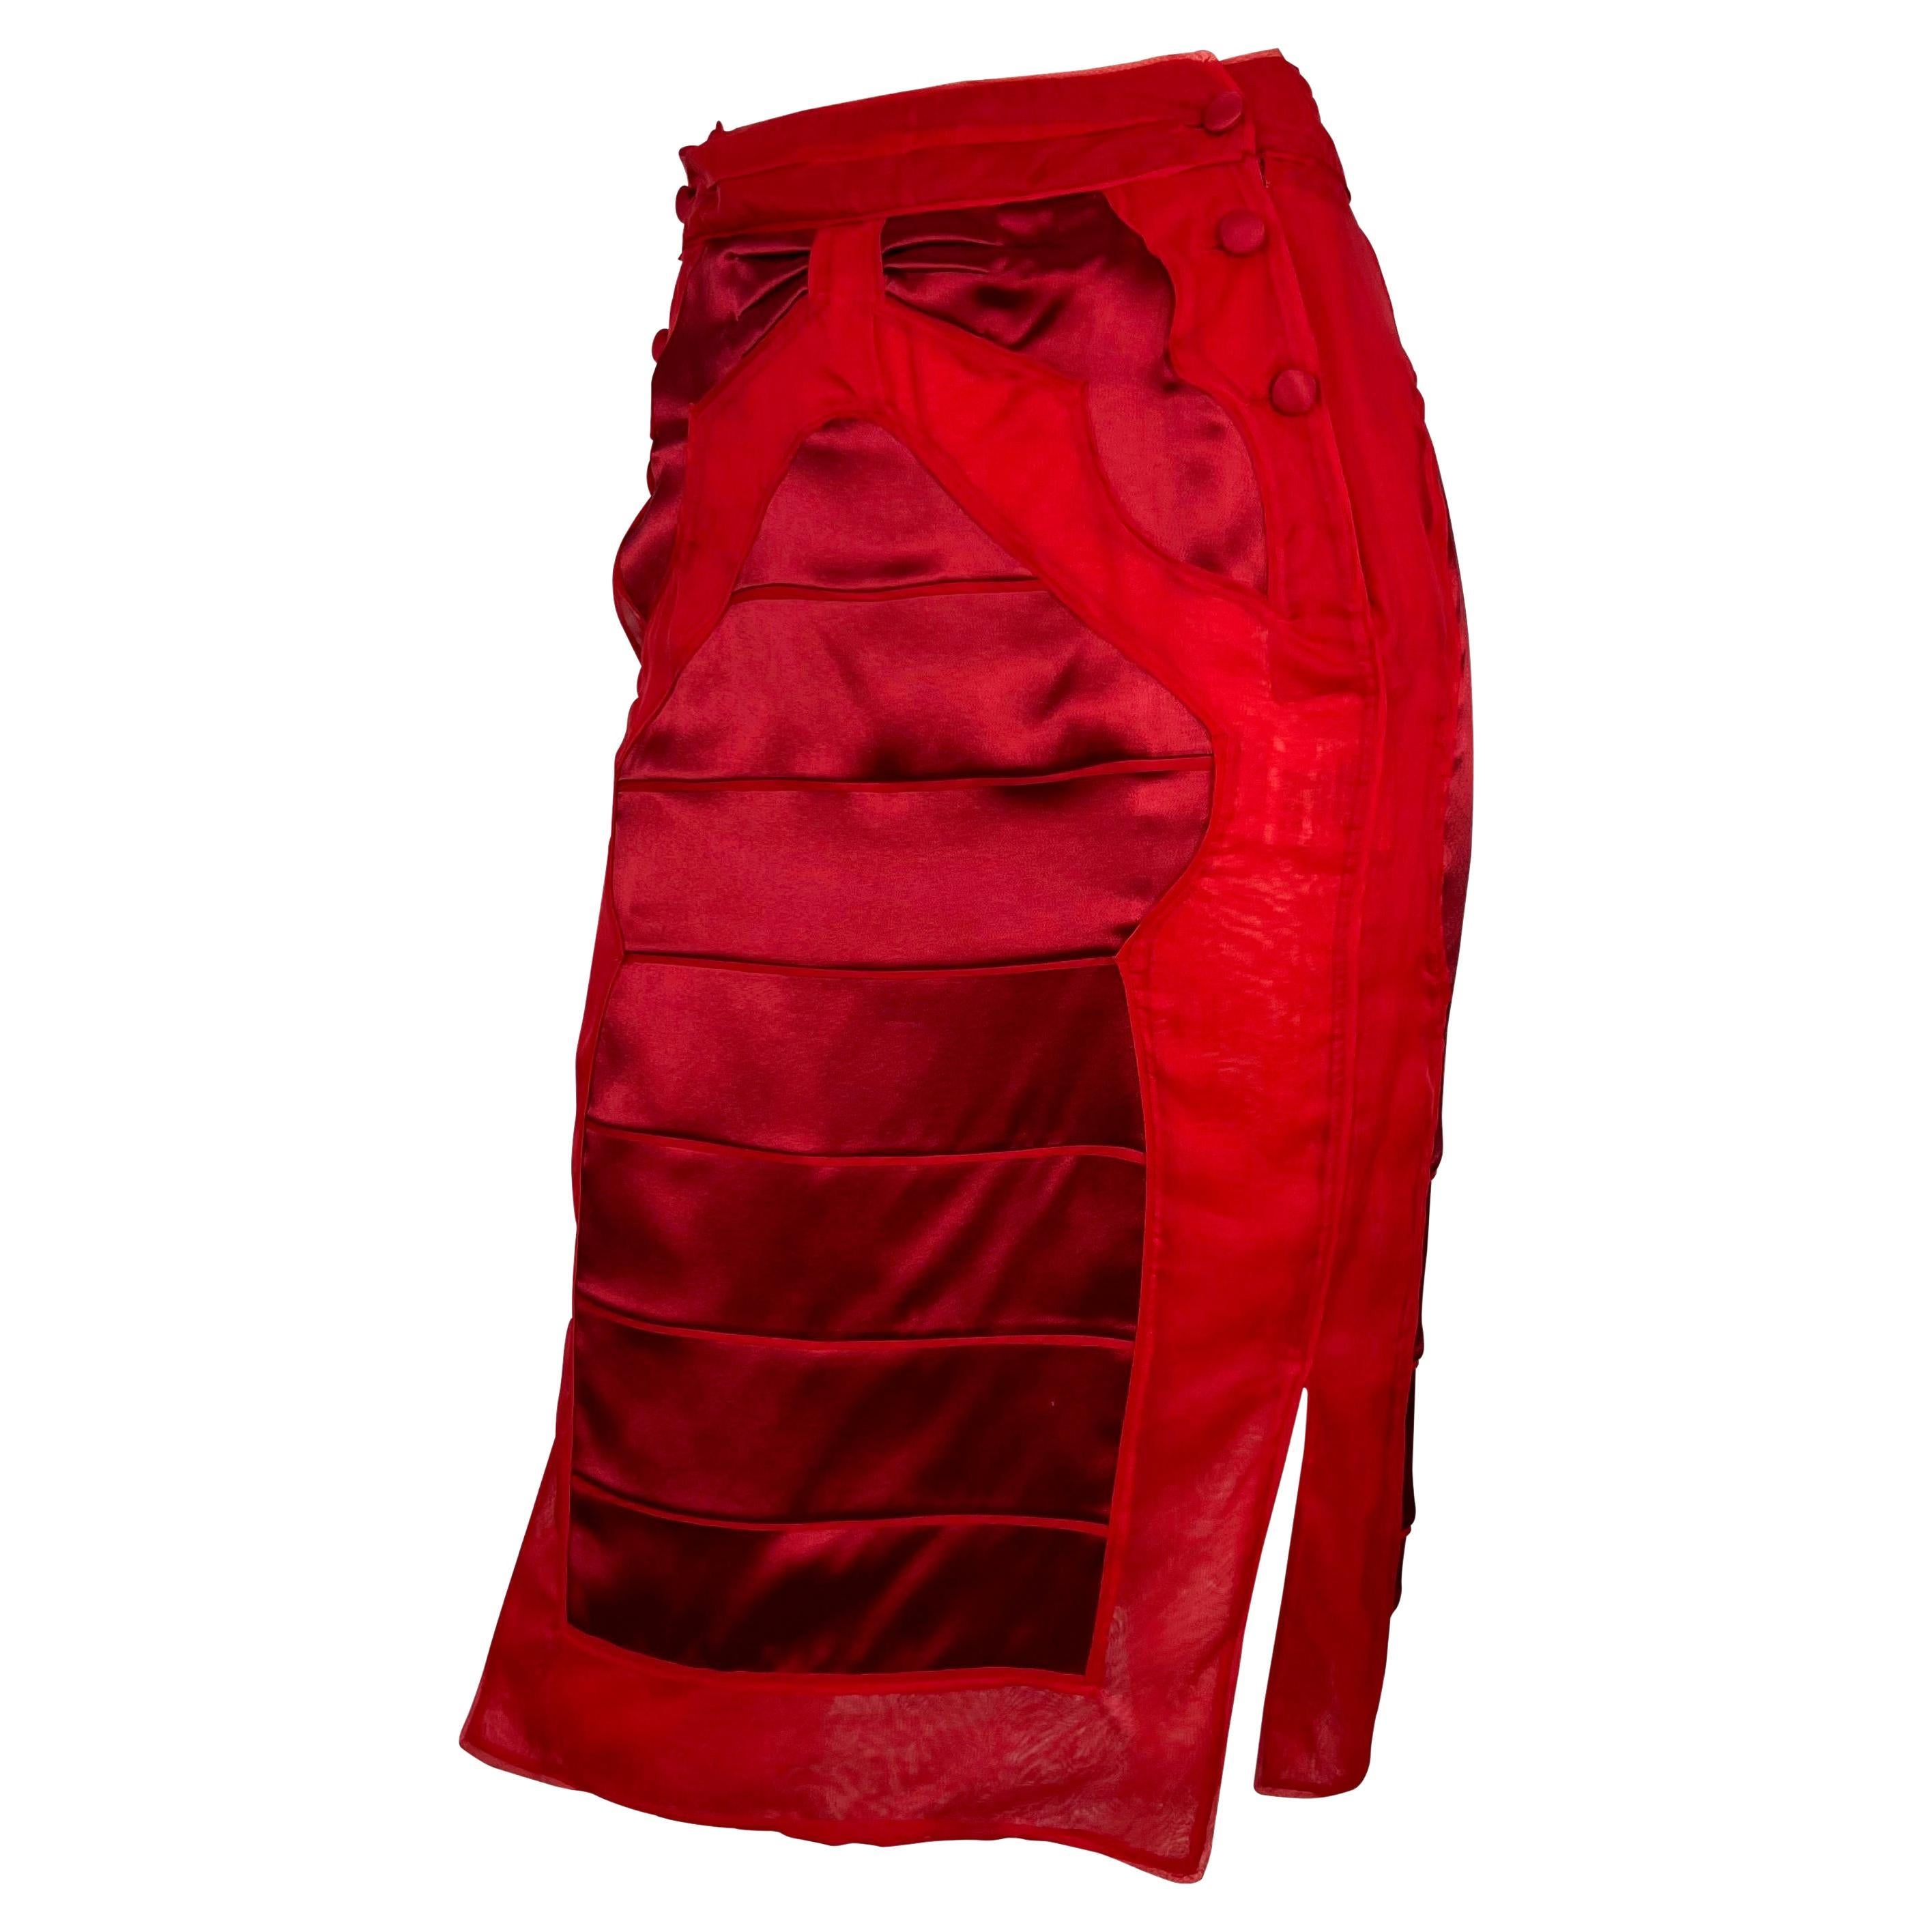 Presenting a deep red silk pencil skirt designed by Tom Ford for Yves Saint Laurent Rive Gauche's Fall/Winter 2004 collection. This collection, commonly referred to as 